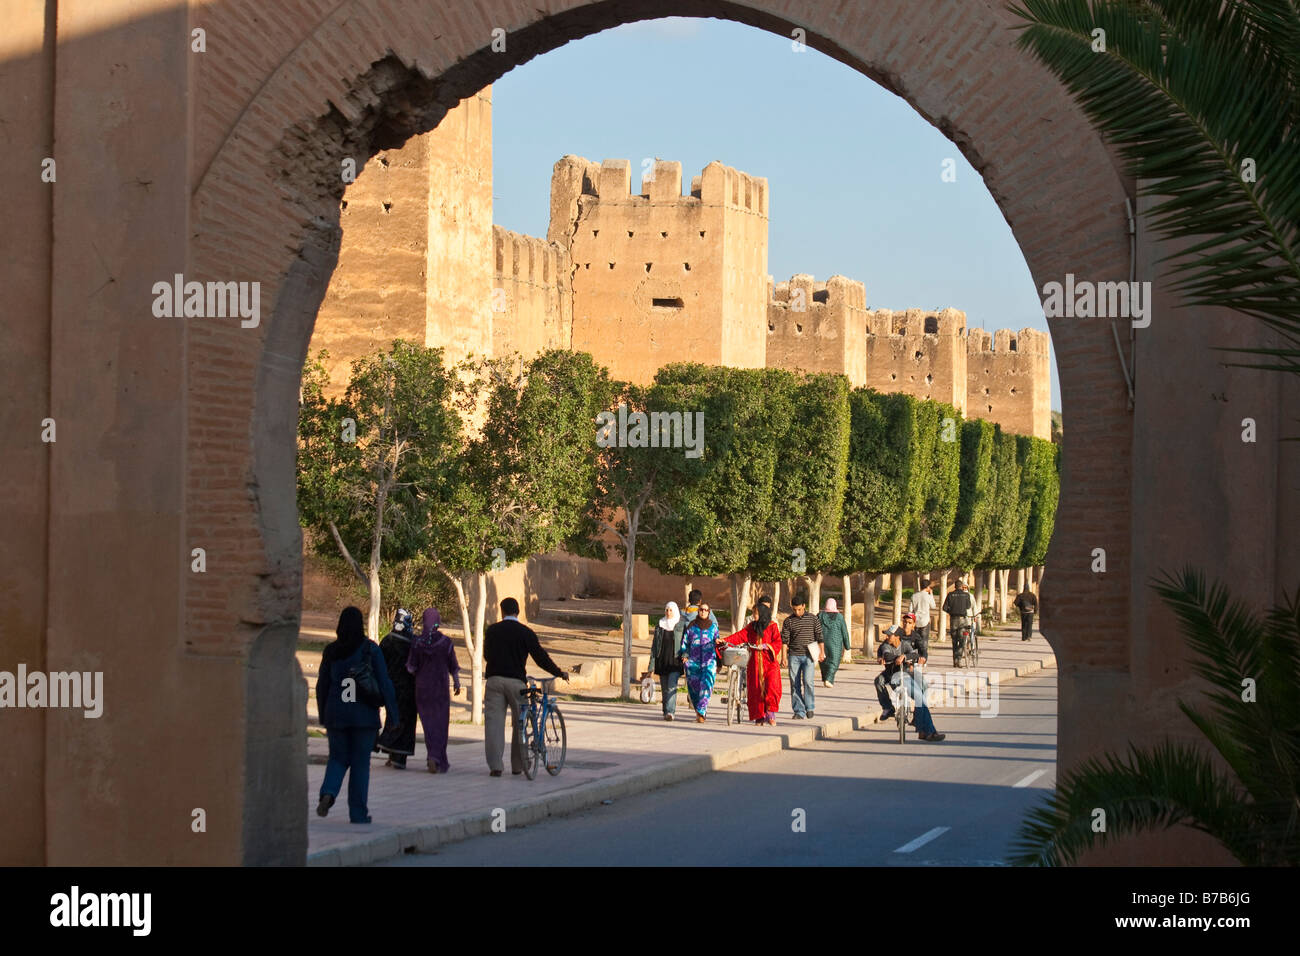 Bab el Kasbah Gate and the City Walls in Taroudannt Morocco Stock Photo